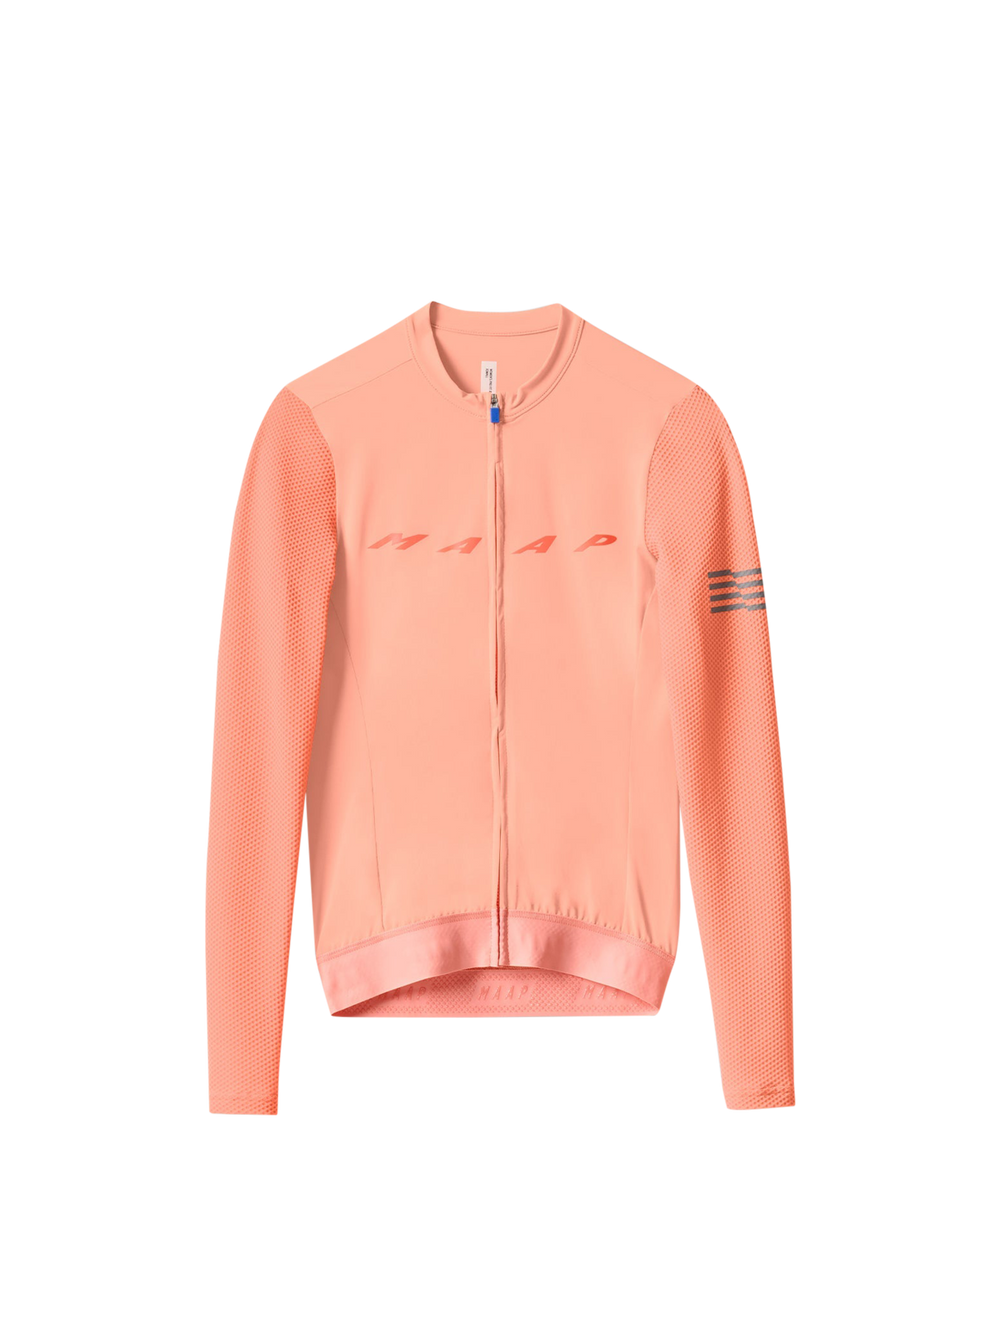 Product Image for Women's Evade Pro Base LS Jersey